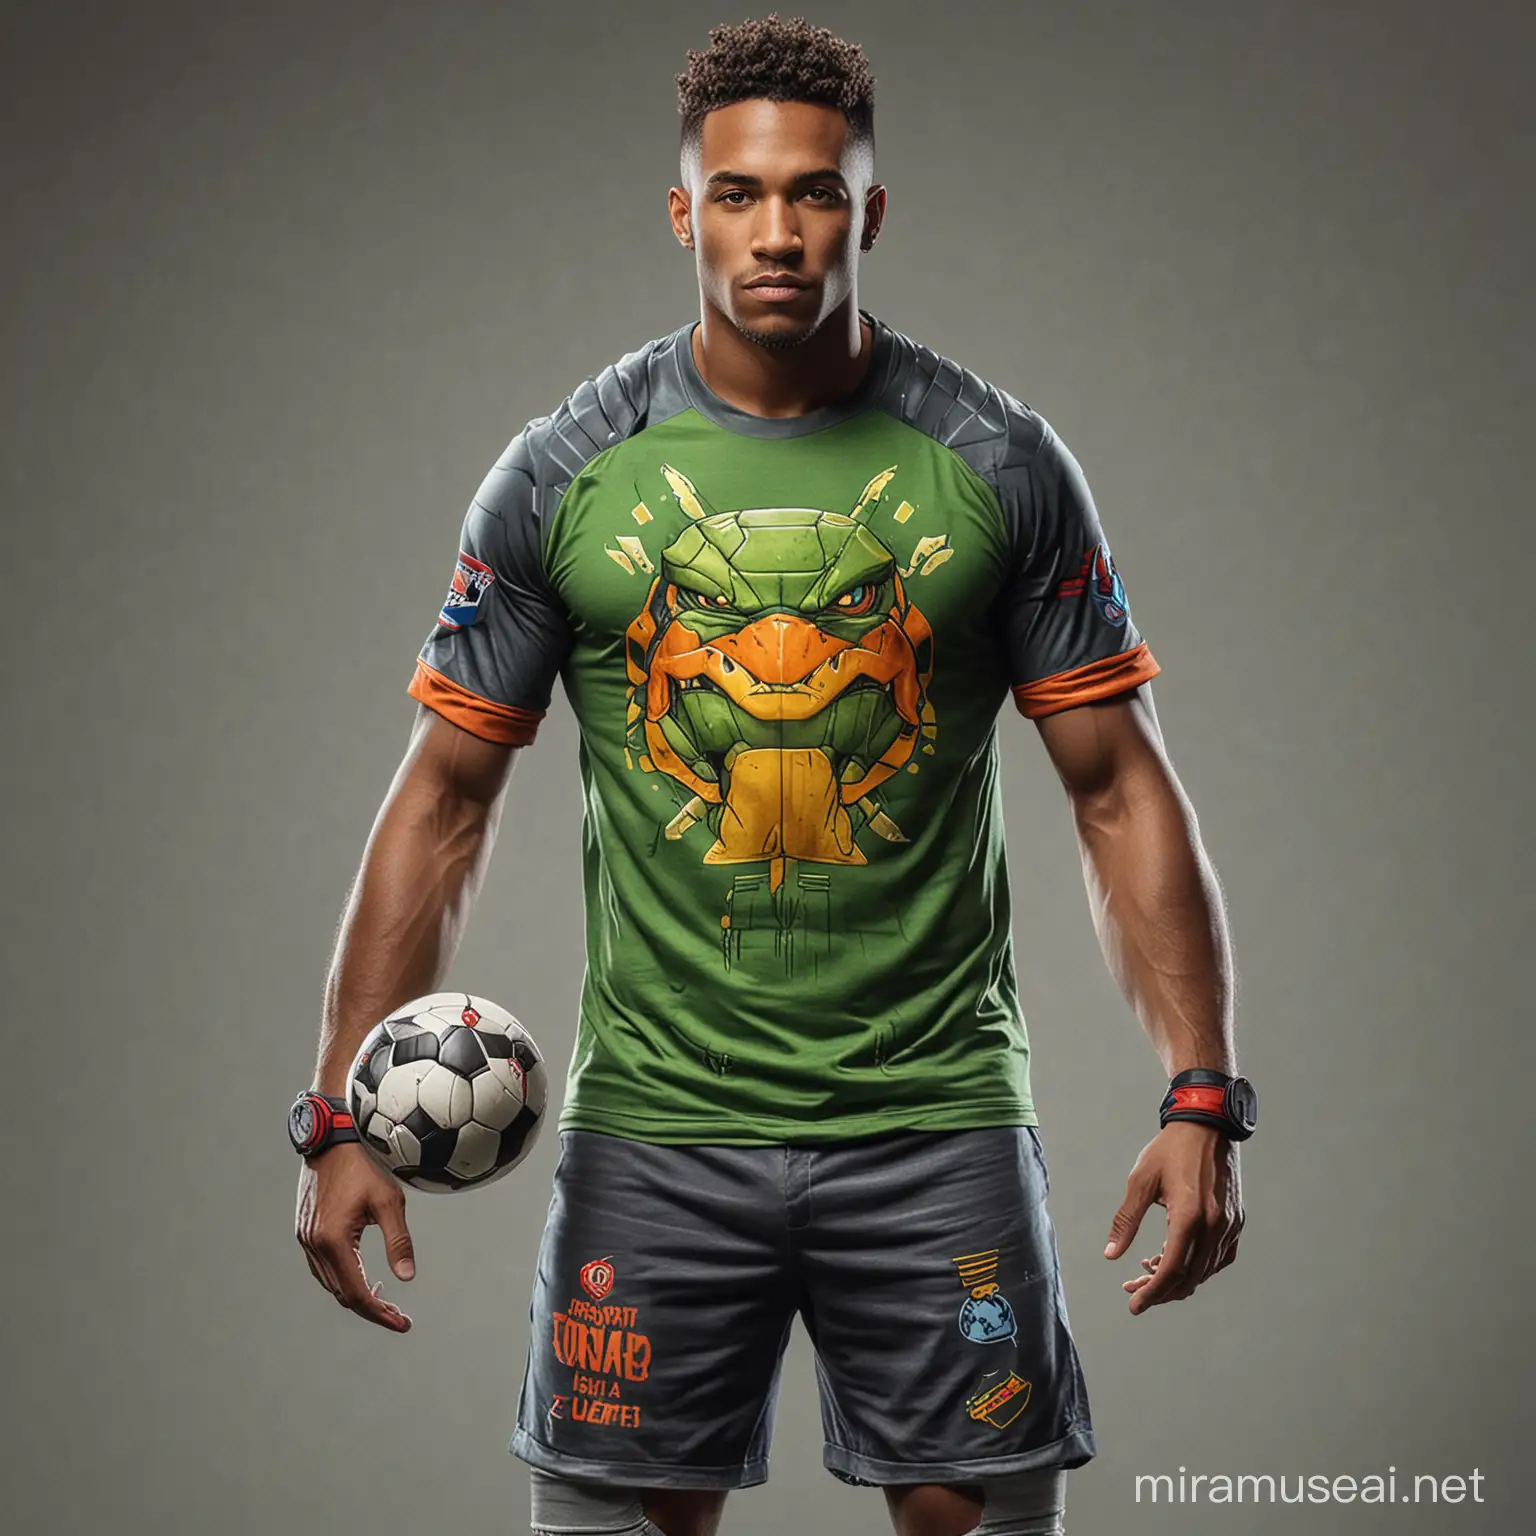 A soccer player wearing a t shirt inspired by tmnt